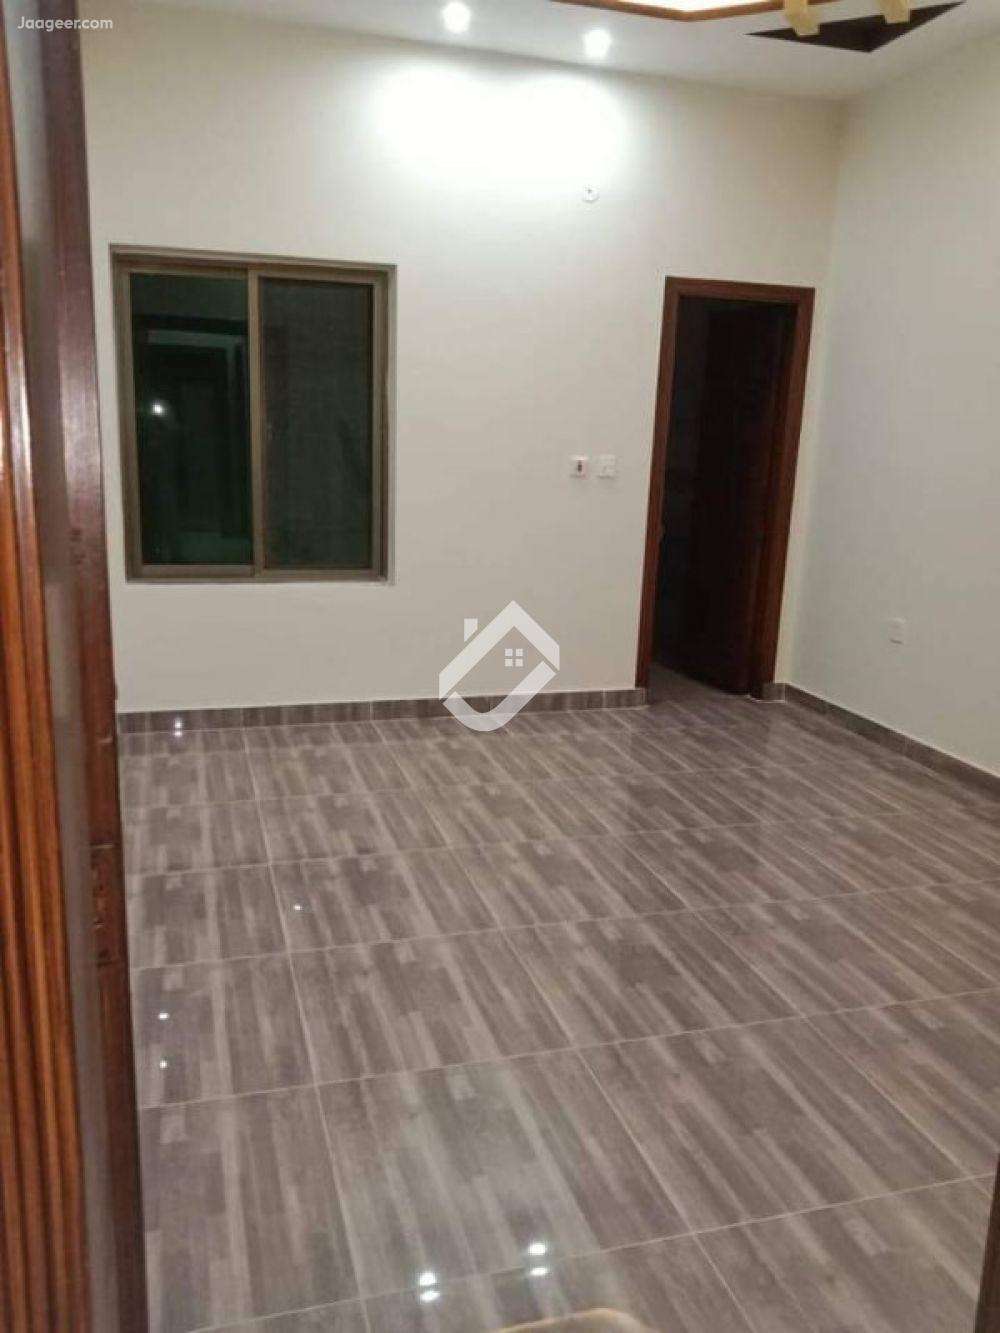 View  5 Marla Double Storey House For Sale In Wapda Town Phase 1 in Wapda Town Phase 1, Multan